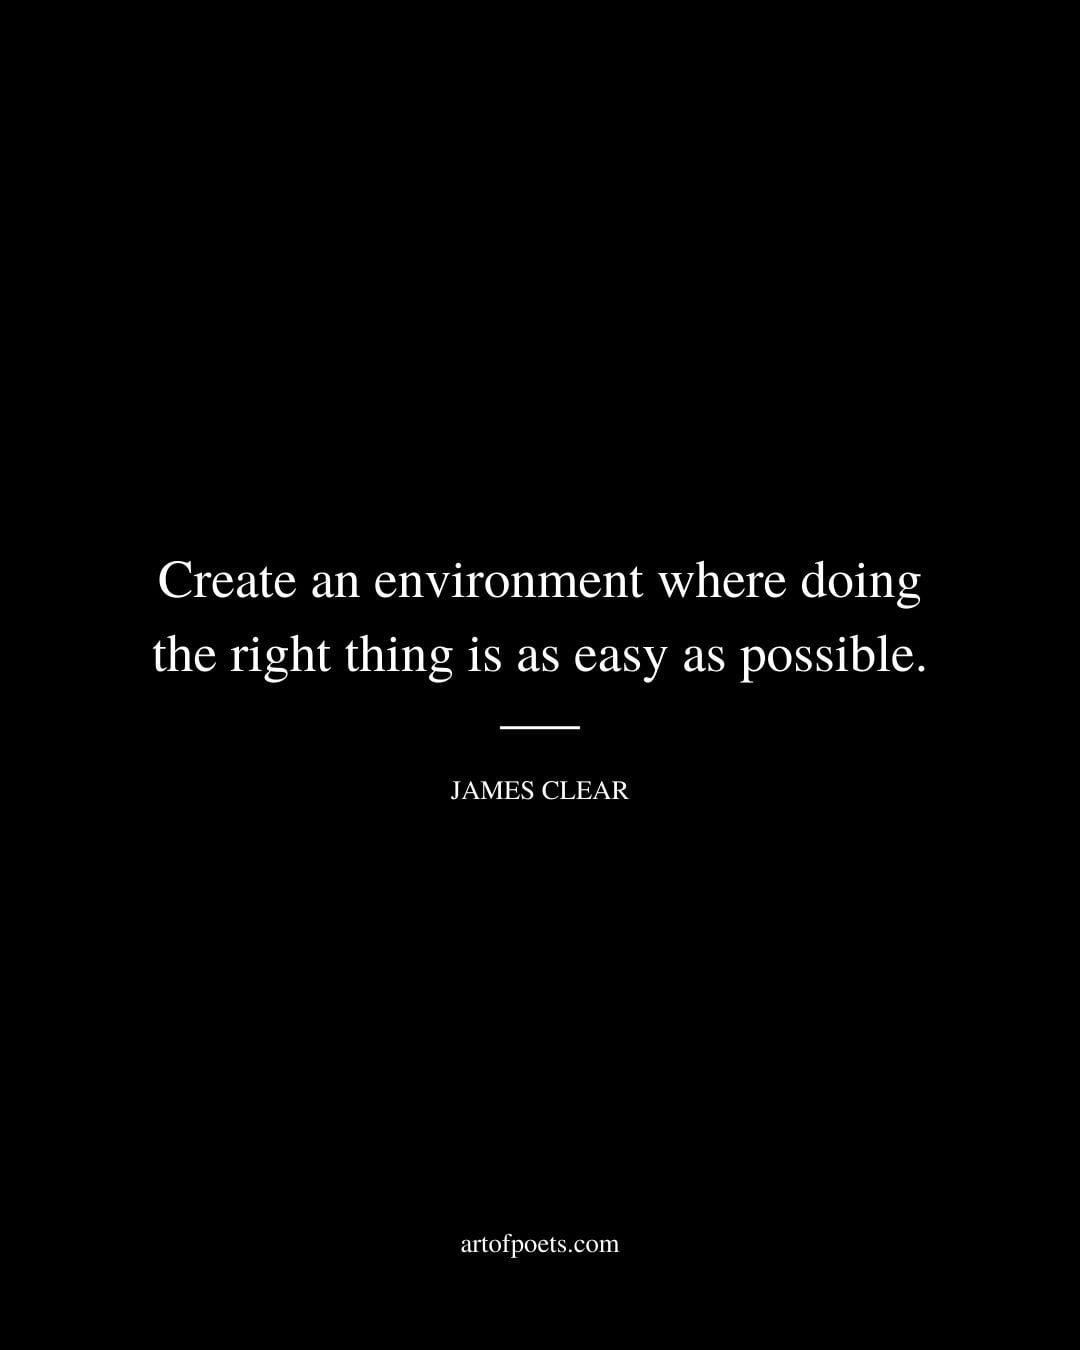 Create an environment where doing the right thing is as easy as possible